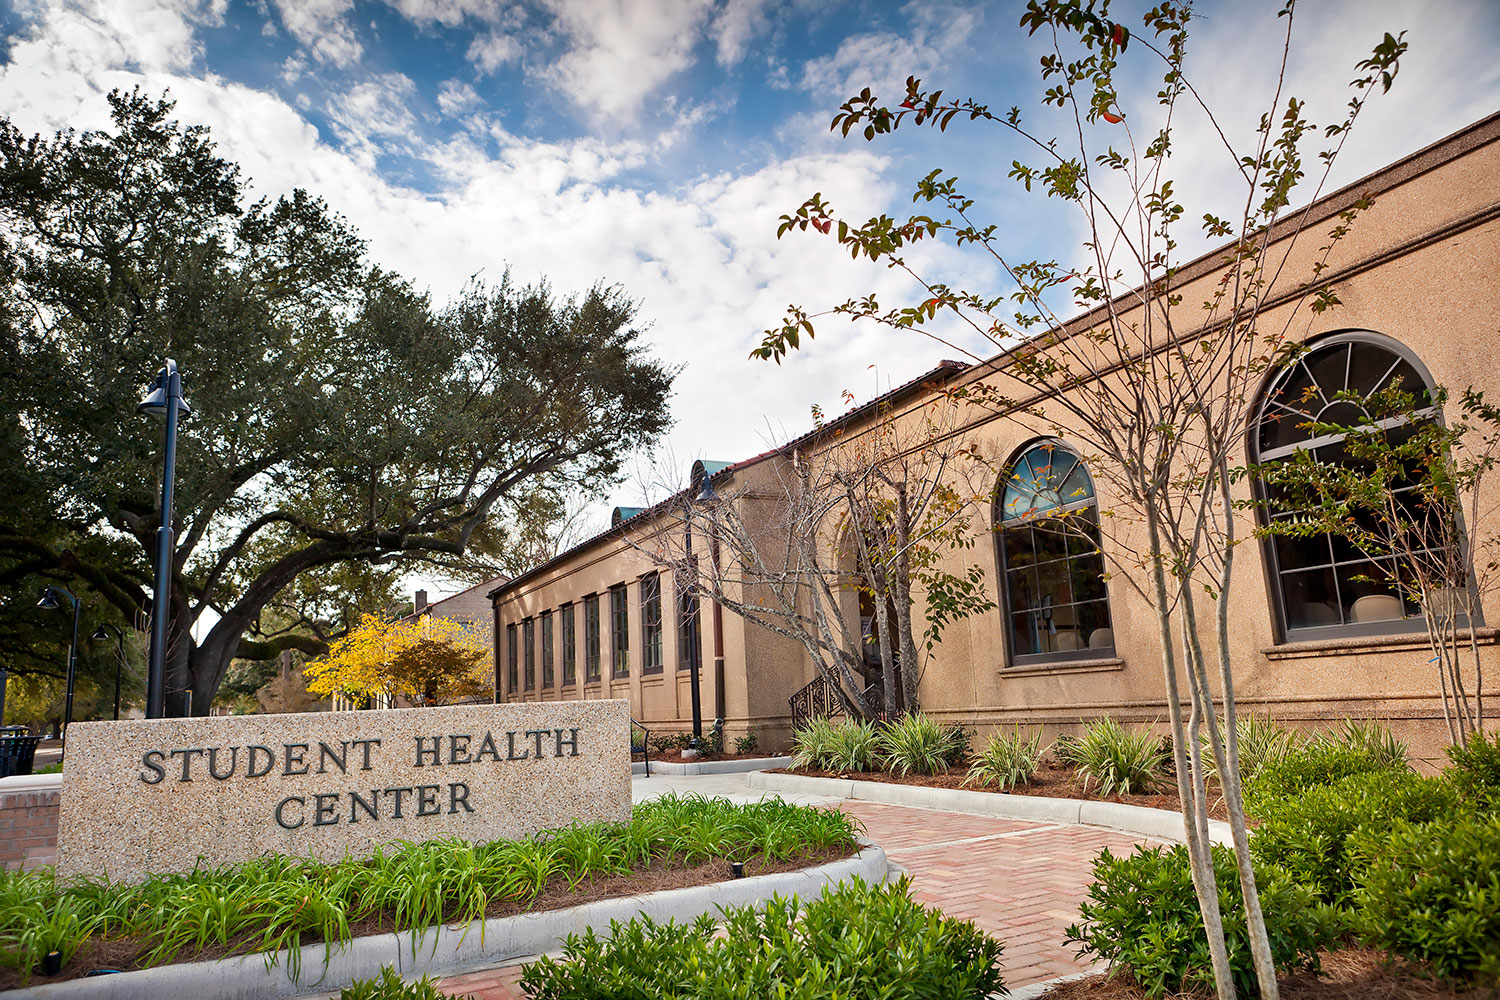 photo of the Student Health Center building